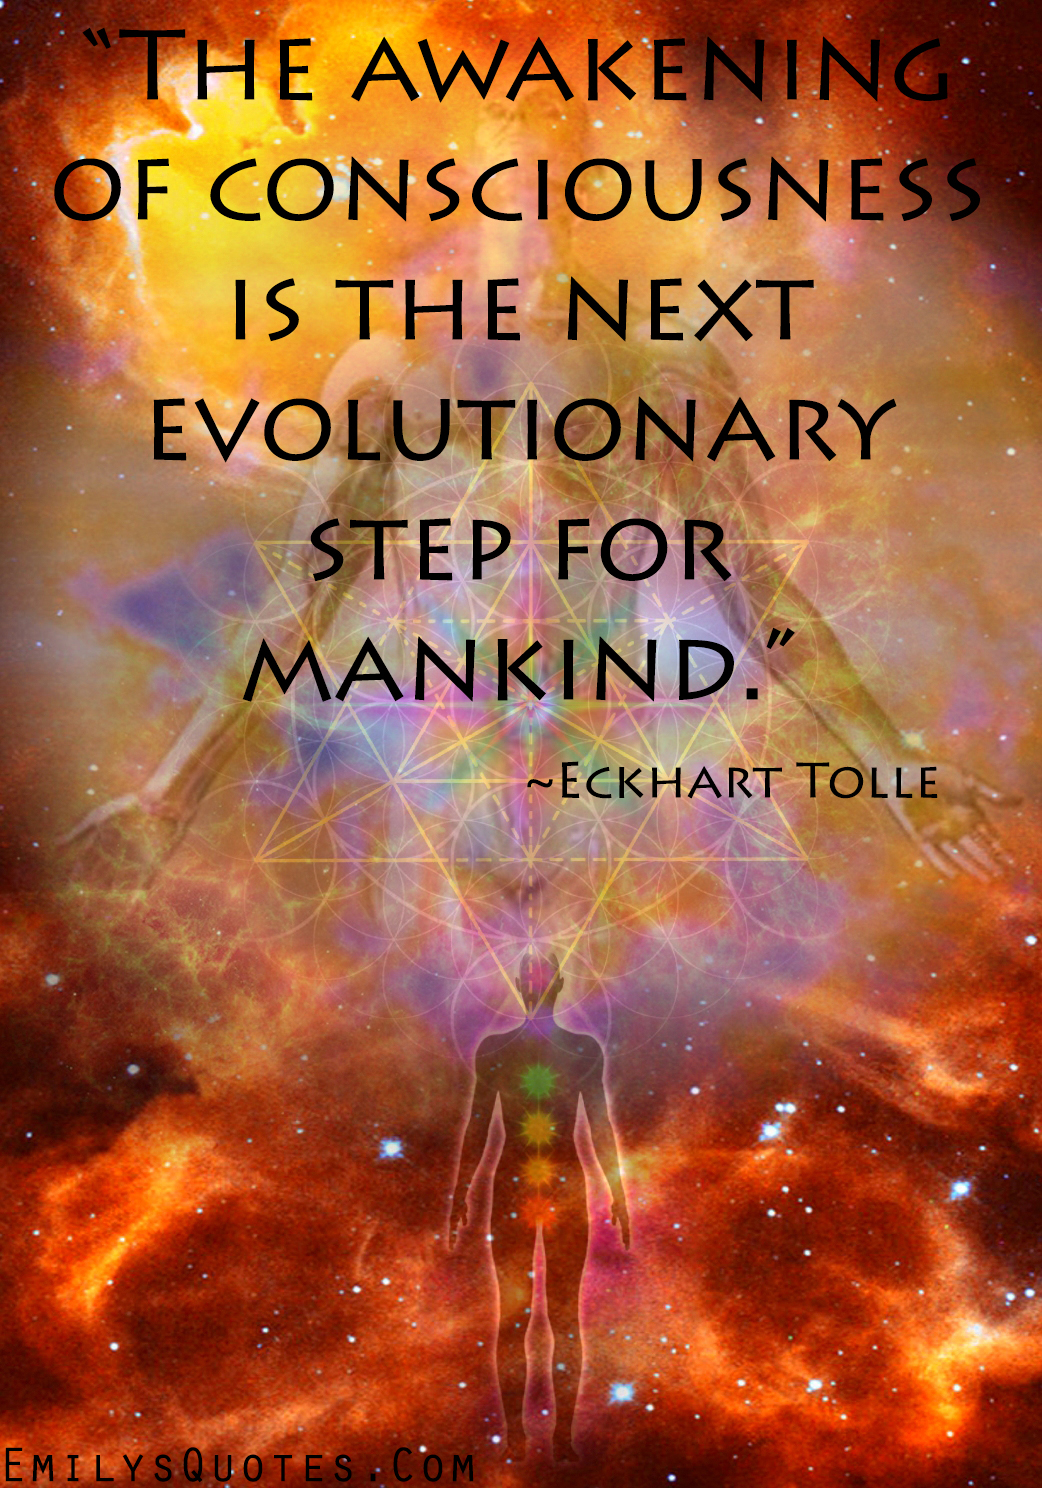 The awakening of consciousness is the next evolutionary step for